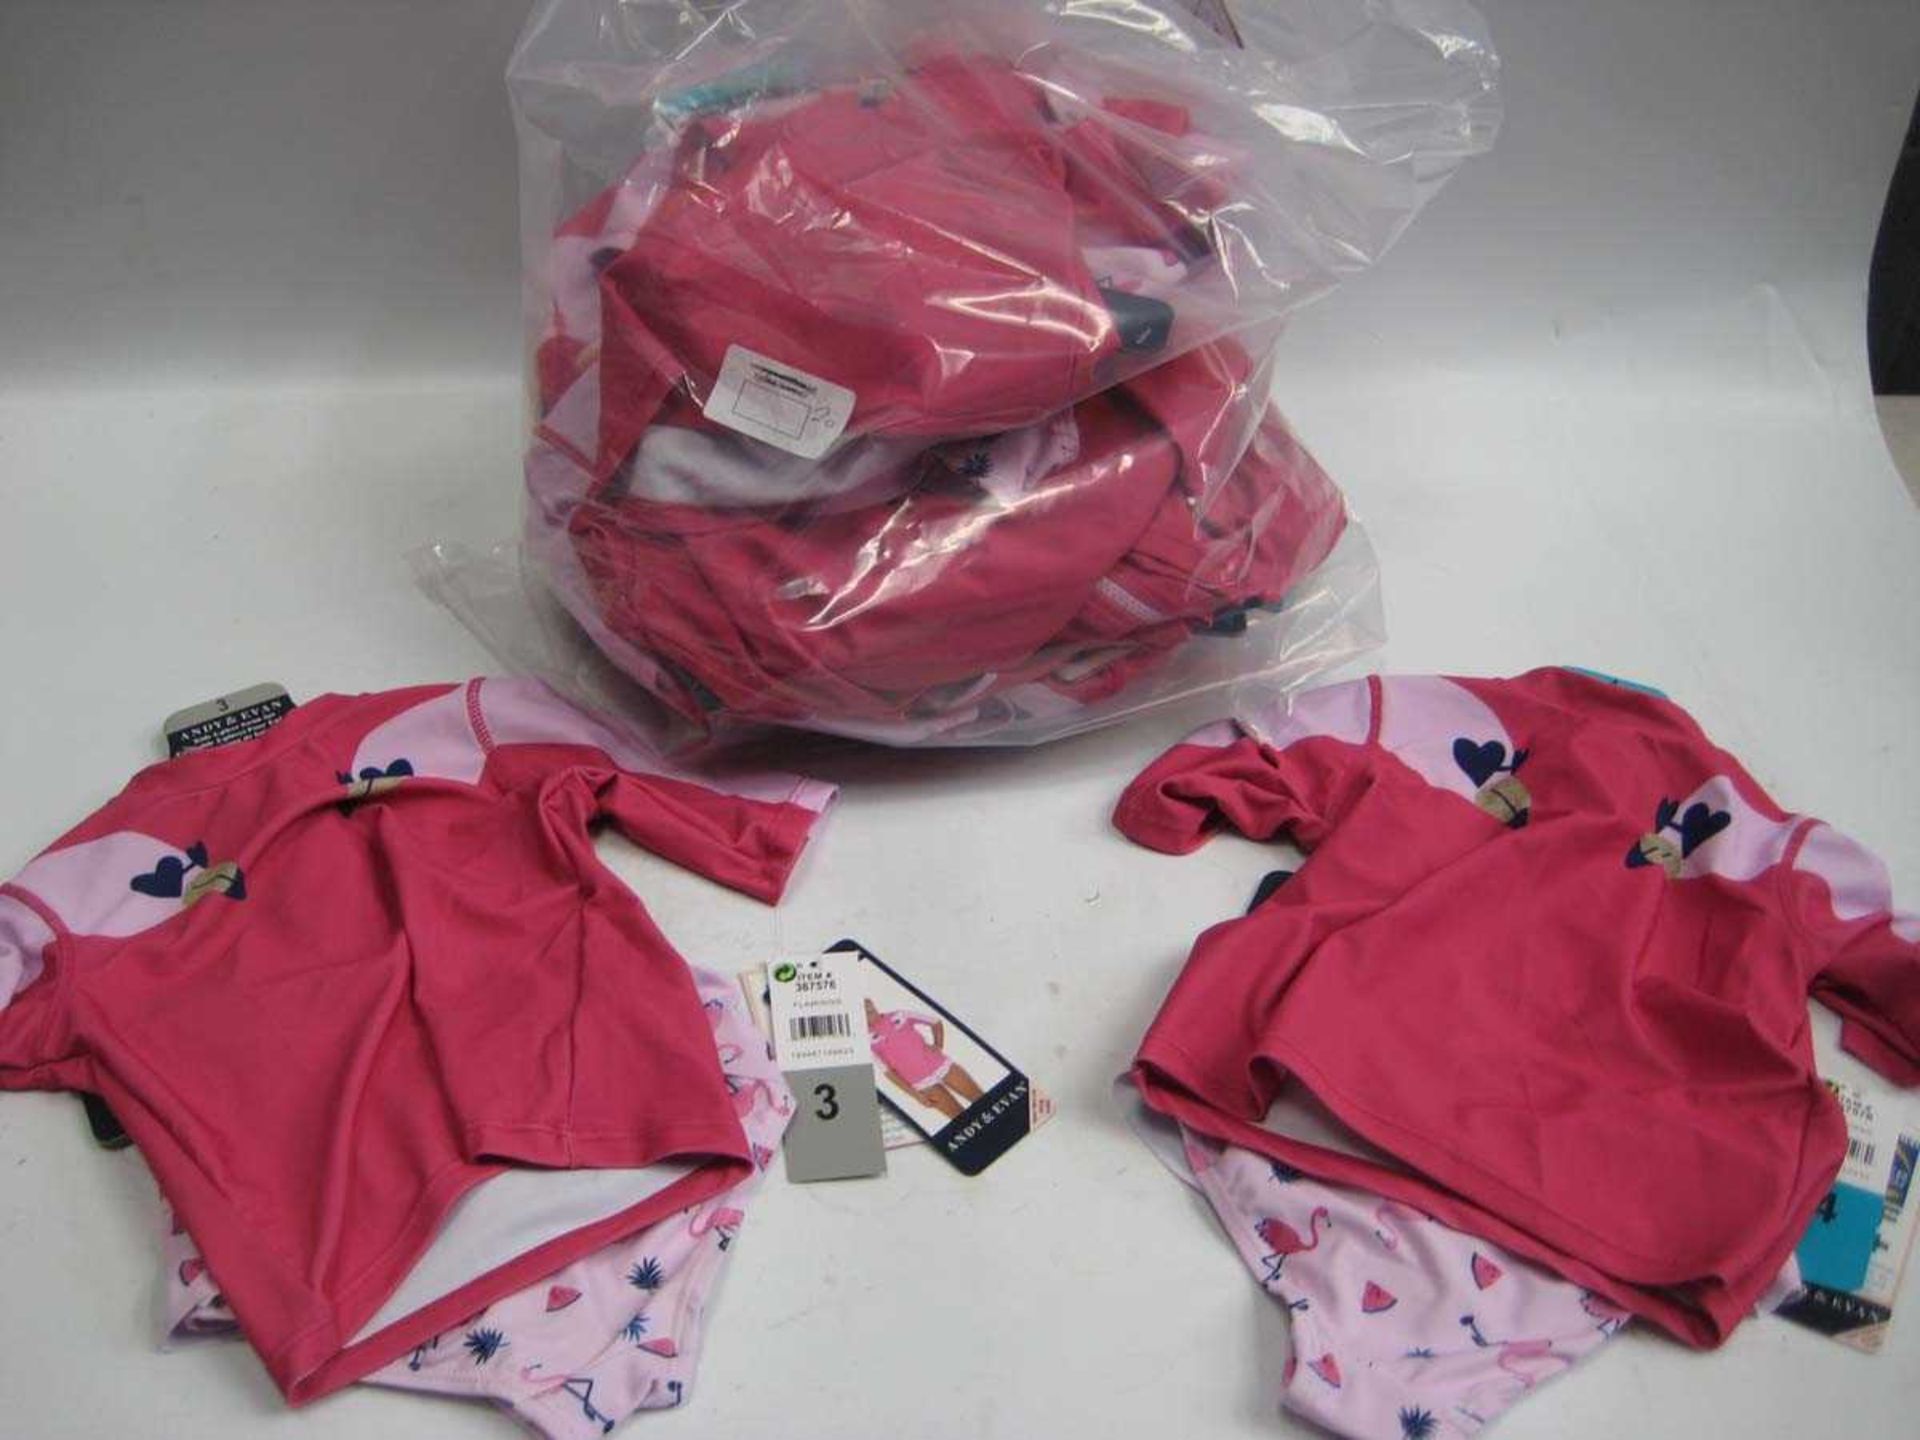 A bag containing approx. 20x sets of Girls Swim Wear in various sizes.